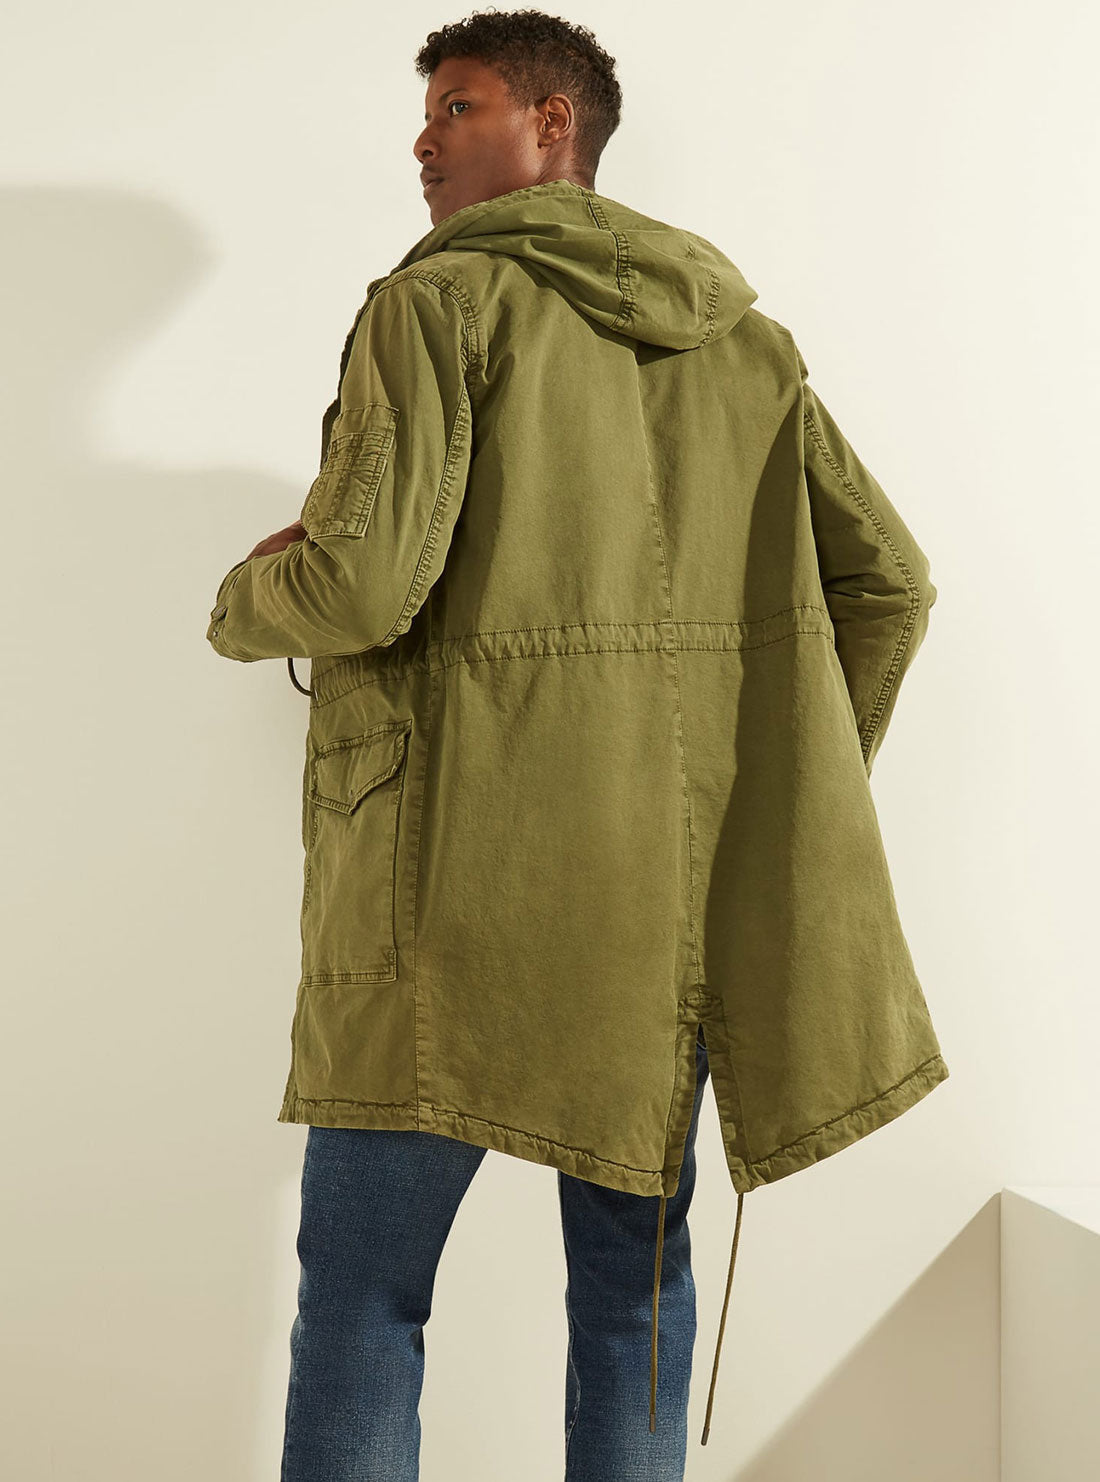 GUESS Twill Hoodie Mens Green Parka Jacket back view